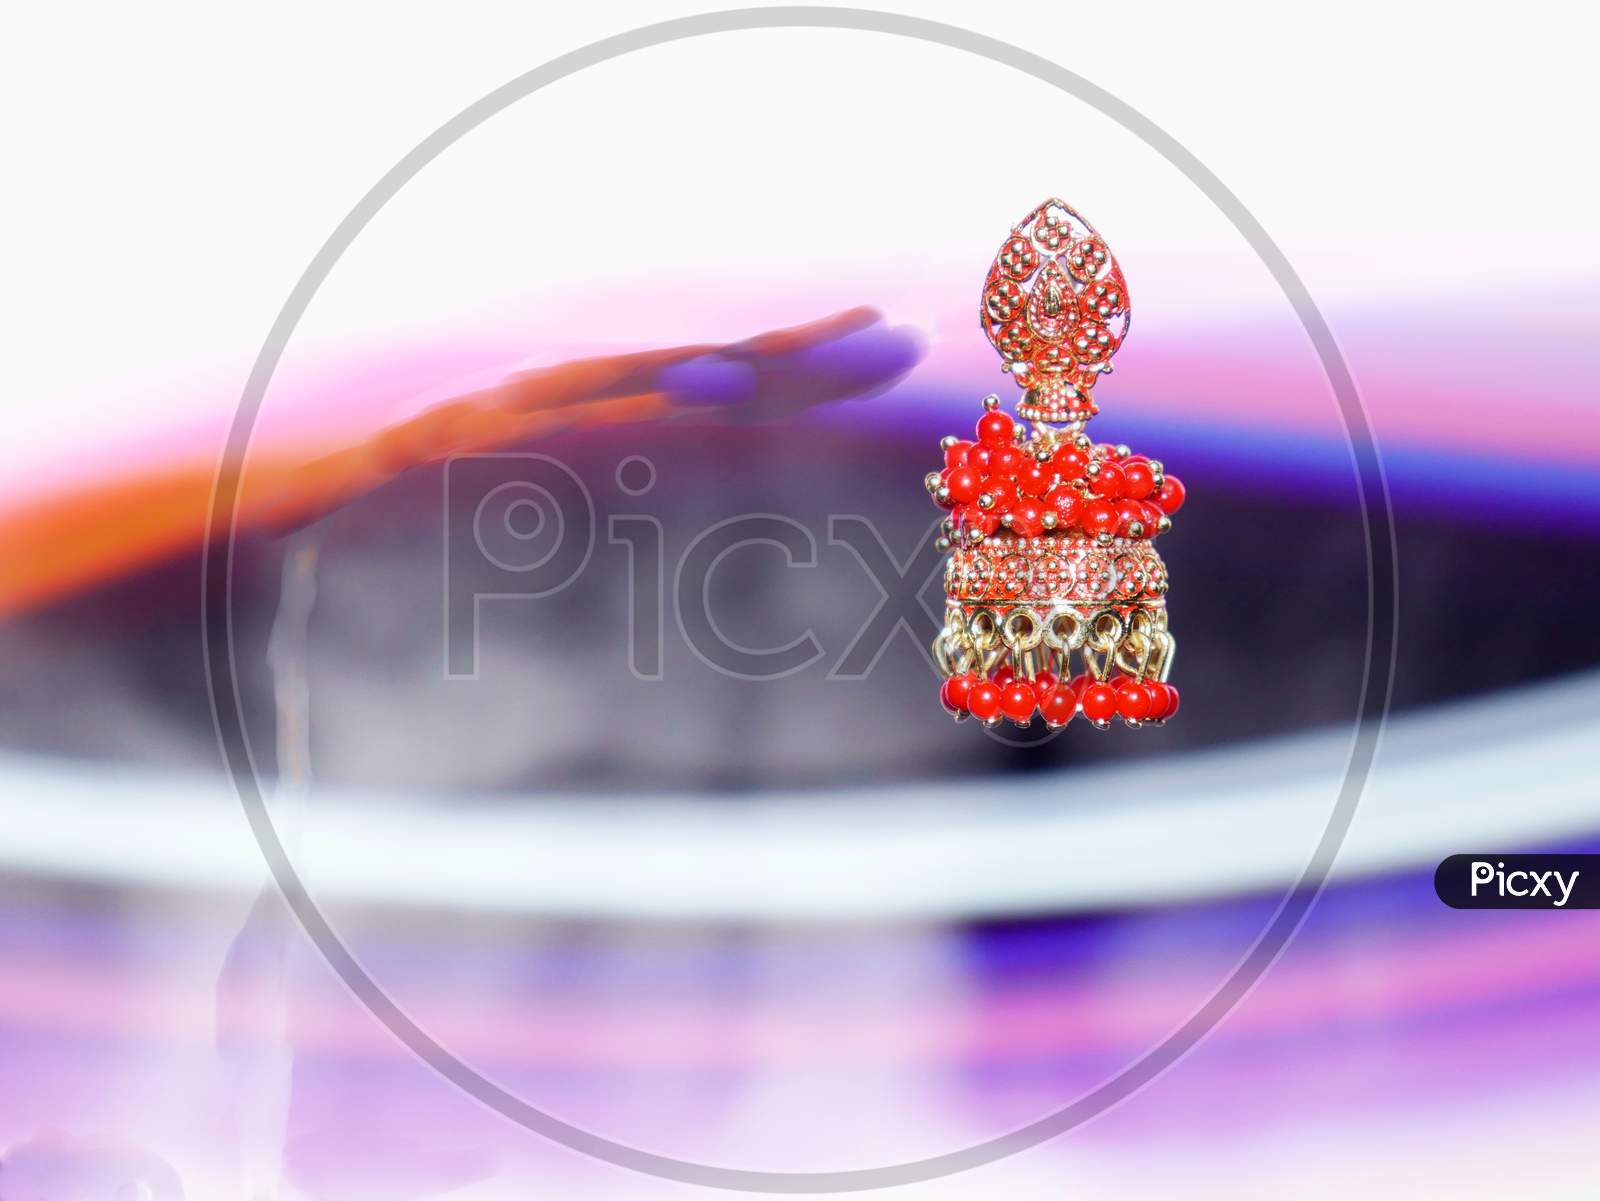 Female Red Color Earrings Presented On Air With Light Effect Shine Backdrop, Commercial Product Presentation Image.